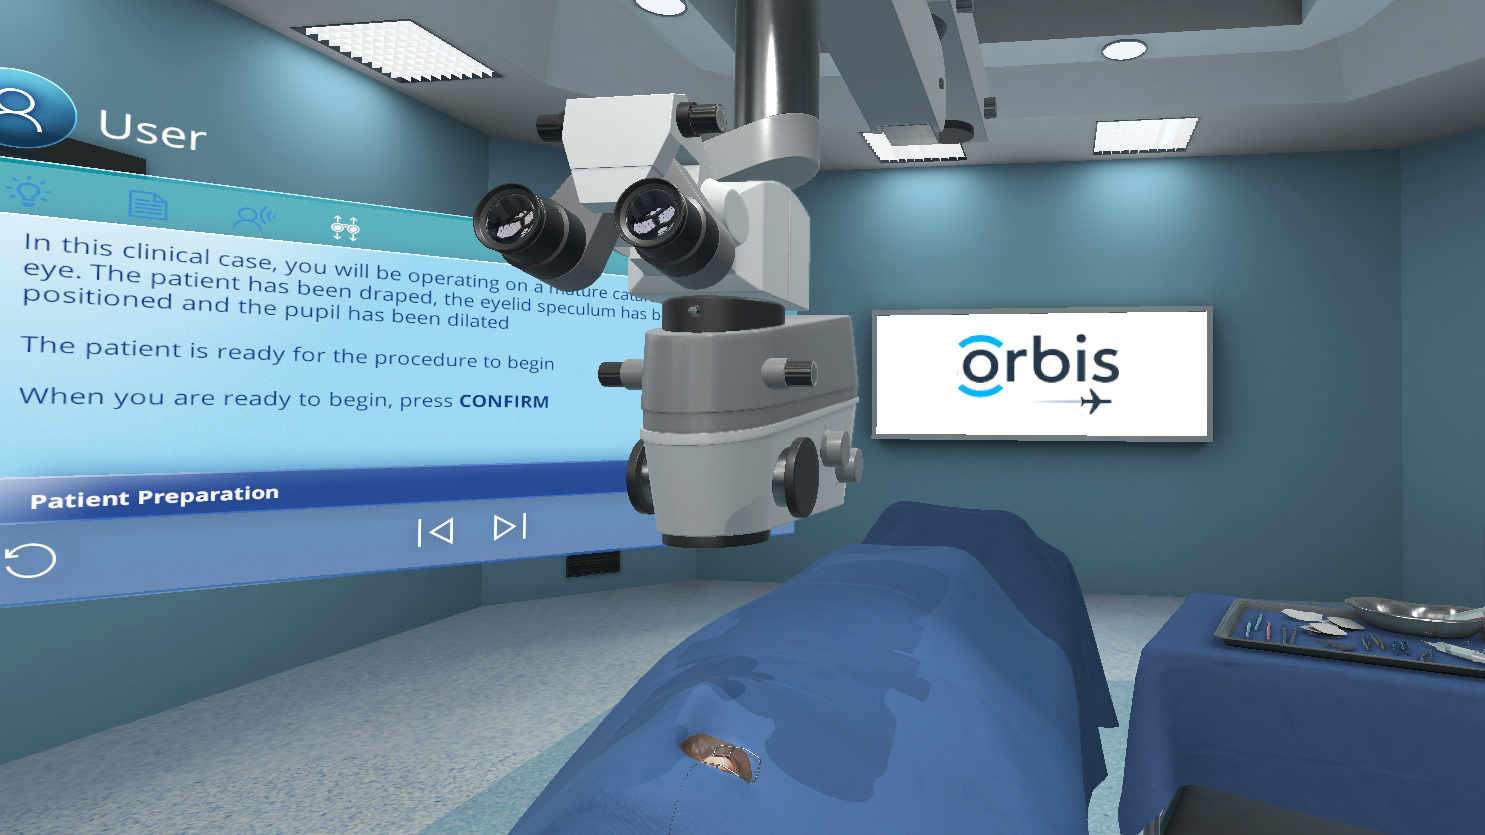 FundamentalVR Expands into VR Surgical Capabilities to Ophthalmology